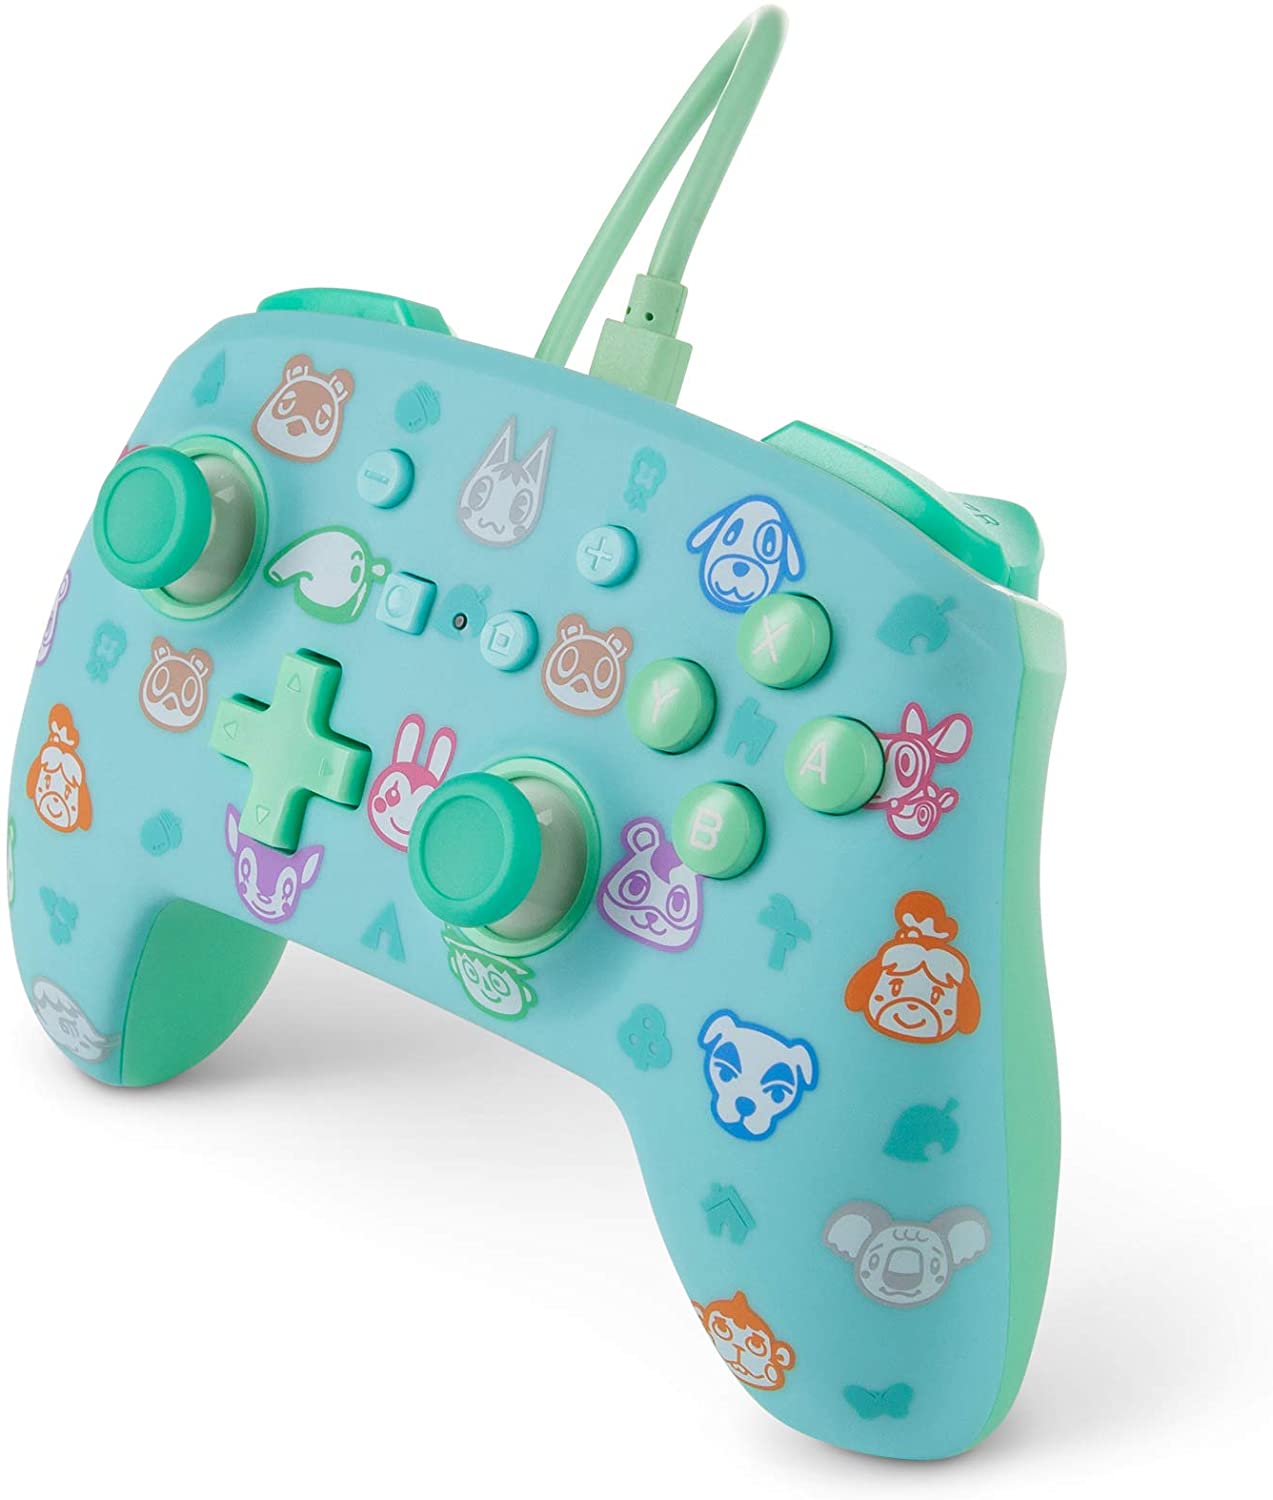 PowerA Enhanced Wired Controller for Nintendo Switch - Animal crossing - Level UpPowerASwitch Accessories6.18E+11